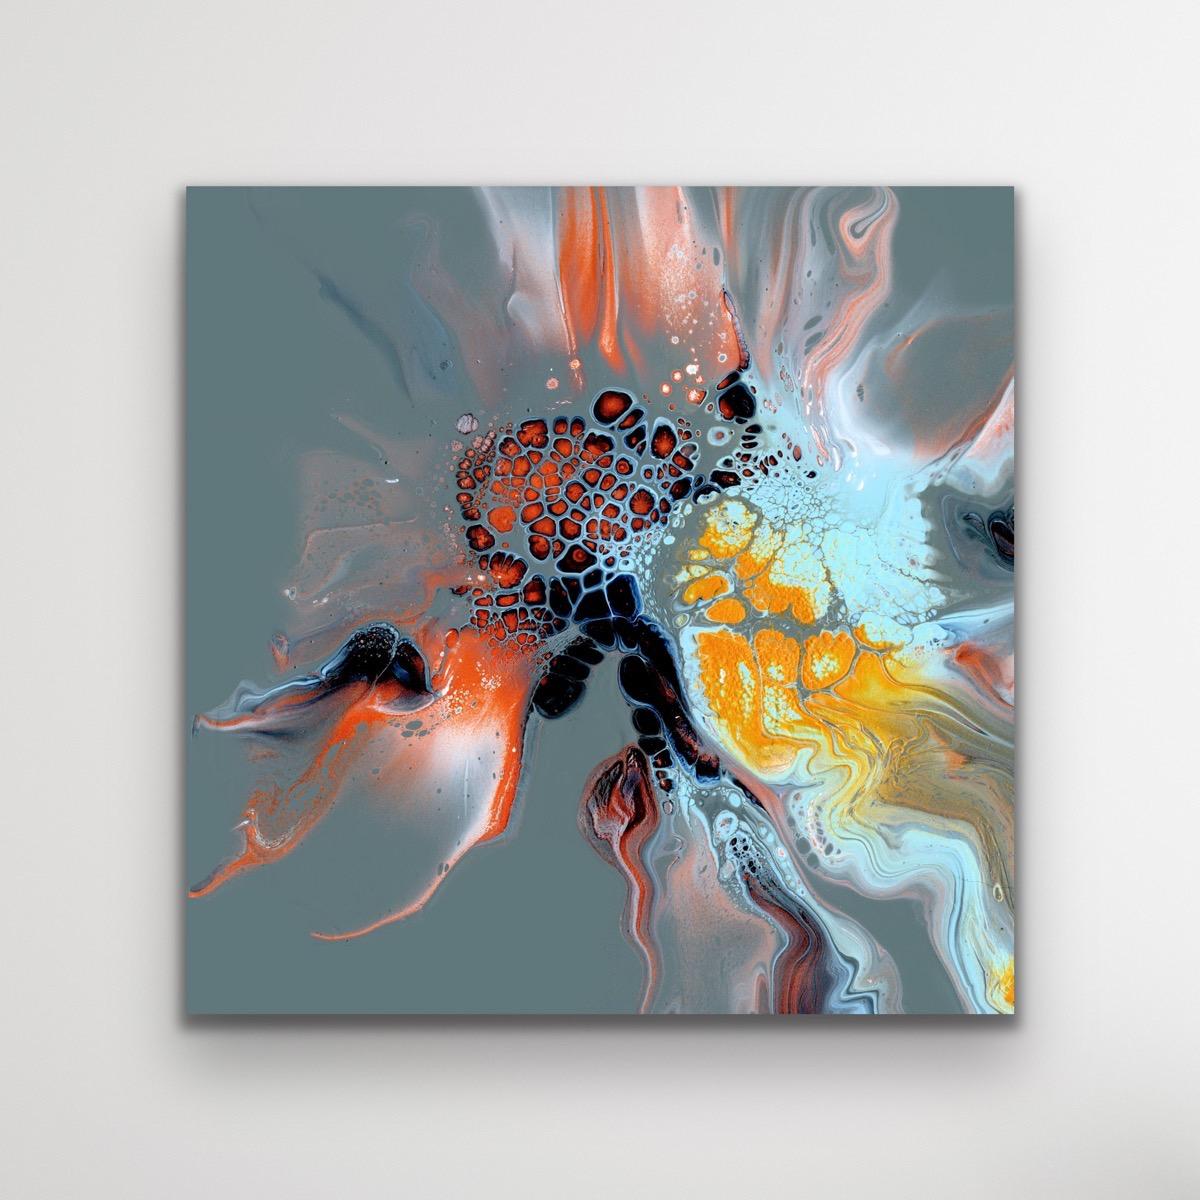 This contemporary colorful abstract giclee of Celeste's original painting is printed on a lightweight metal composite and comes signed by the hand-artist, ready to hang. 

-Title: Eureka
-Artist: "Cessy" Celeste Reiter
LIMITED EDITION; #2 of